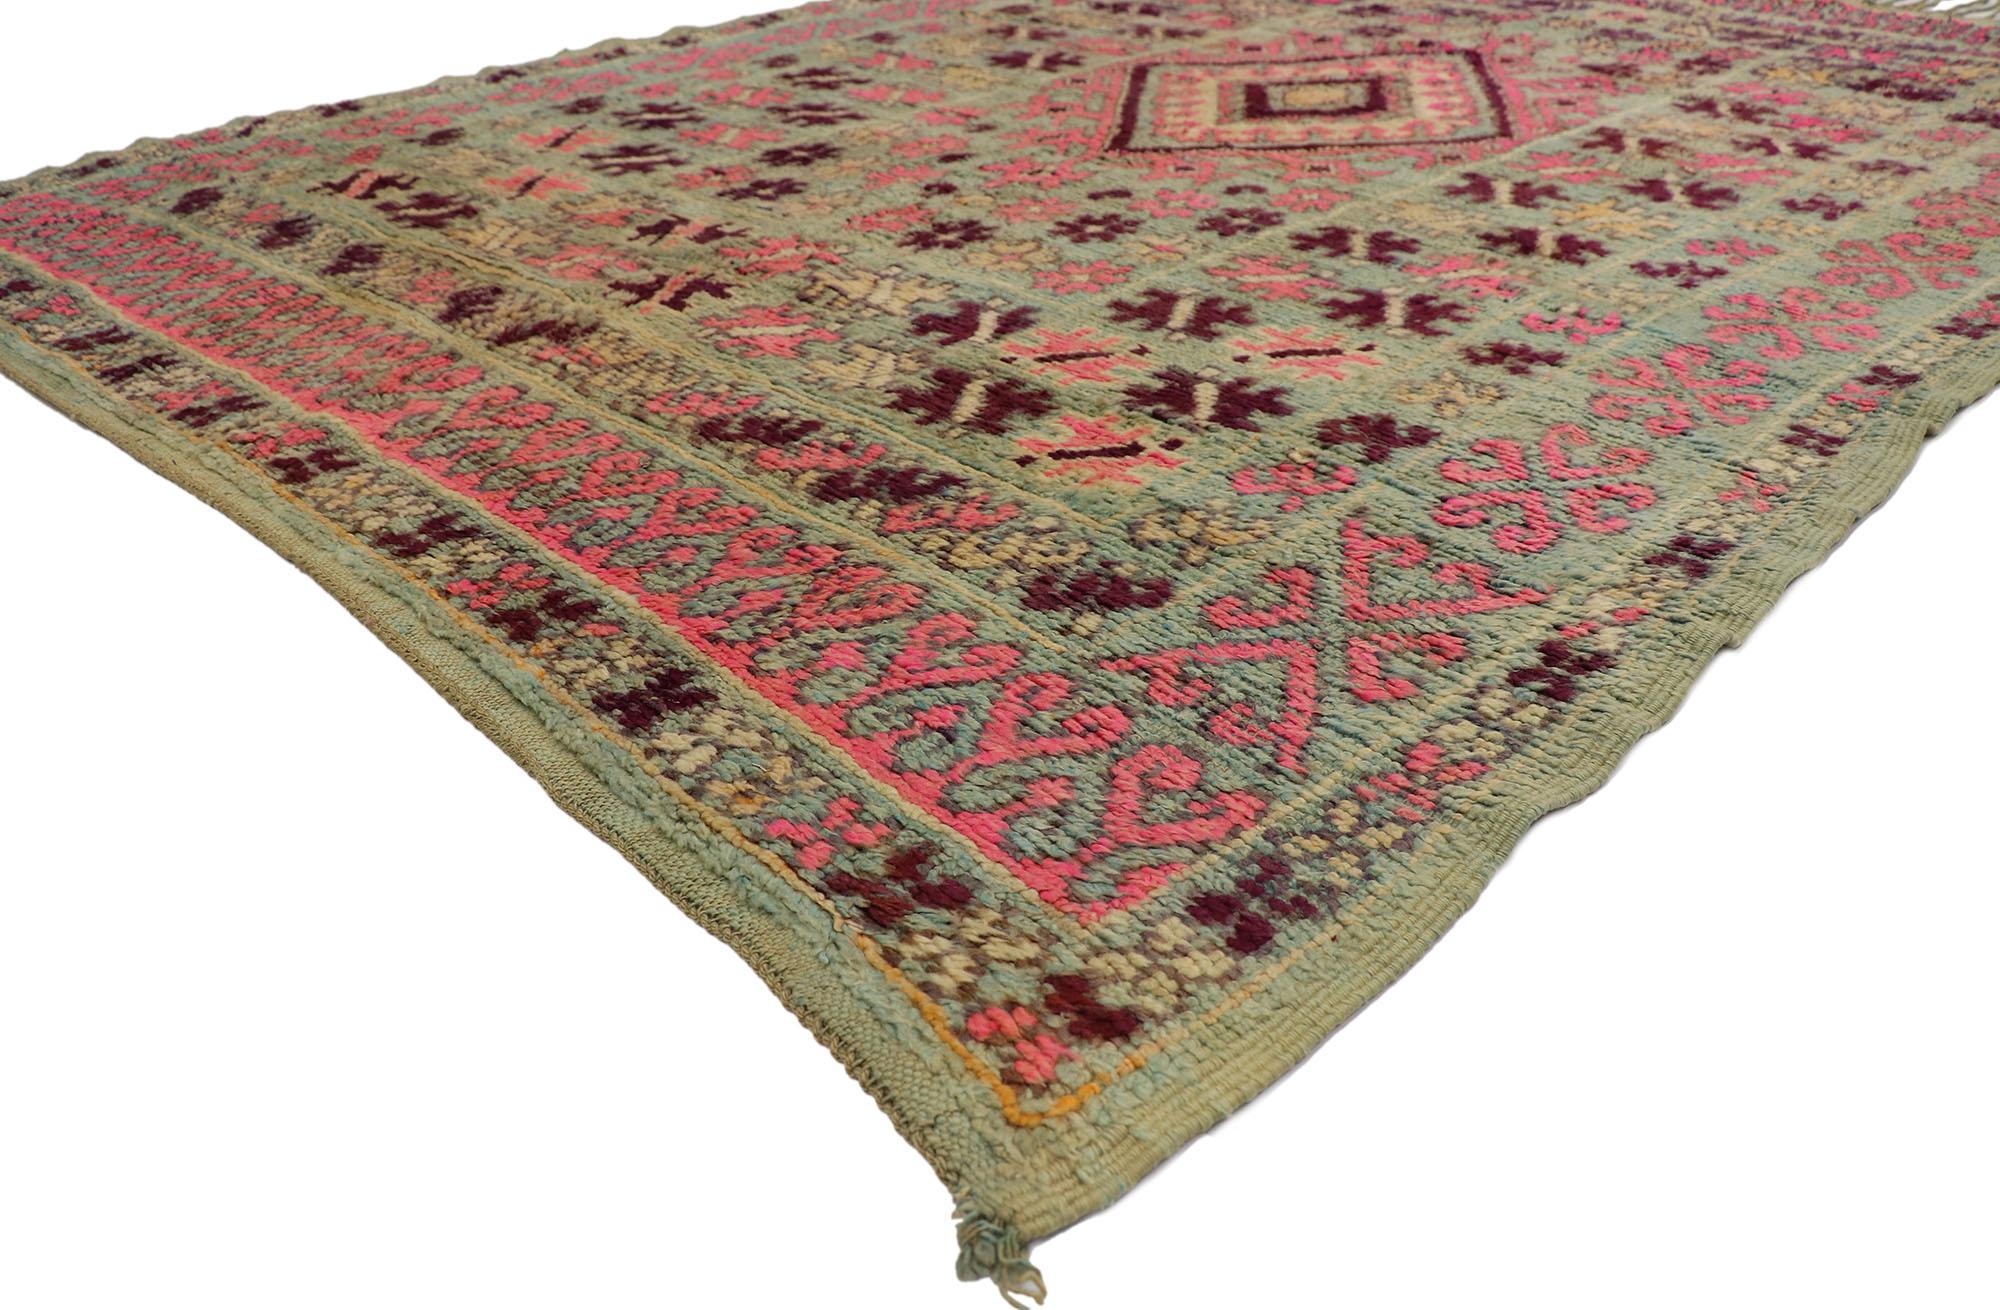 ?21524, vintage Berber Boujad Moroccan rug with boho chic Tribal style. ??Showcasing an expressive design in lively colors, incredible detail and texture, this hand knotted wool vintage Berber Boujad Moroccan rug is a captivating vision of woven